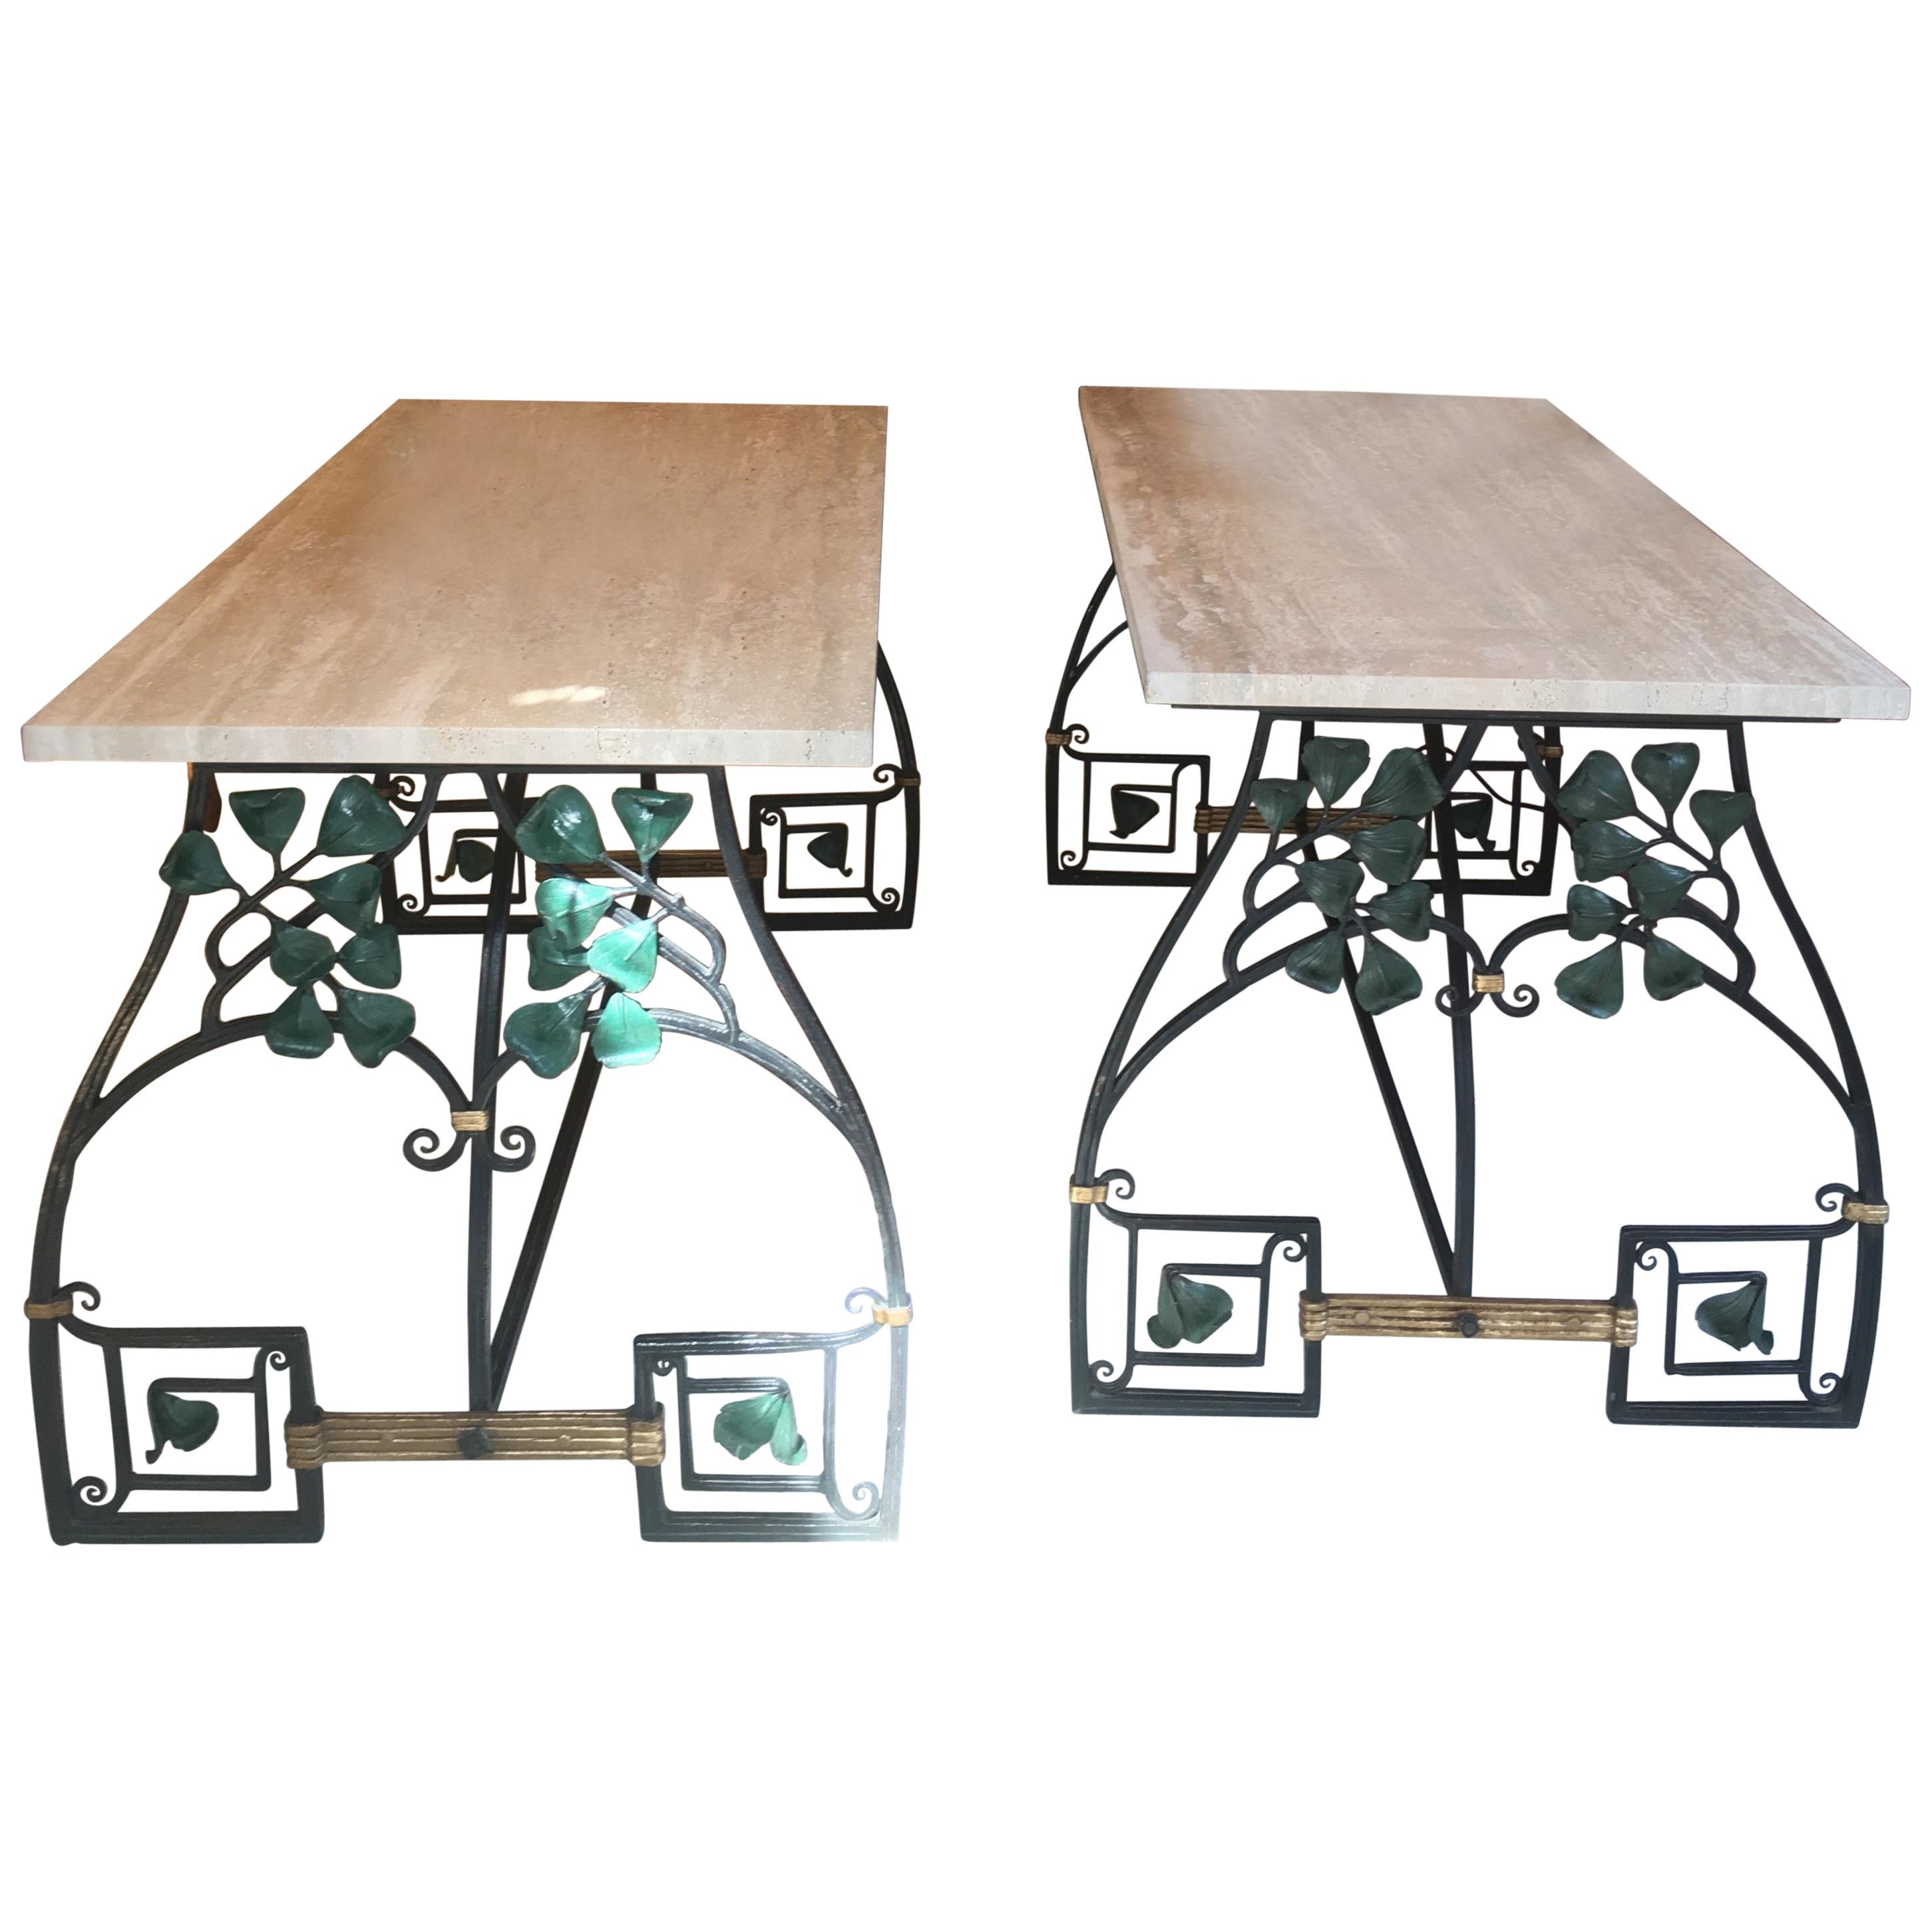 Pair of Wrought Iron Tables, Travertine Tray, 1920